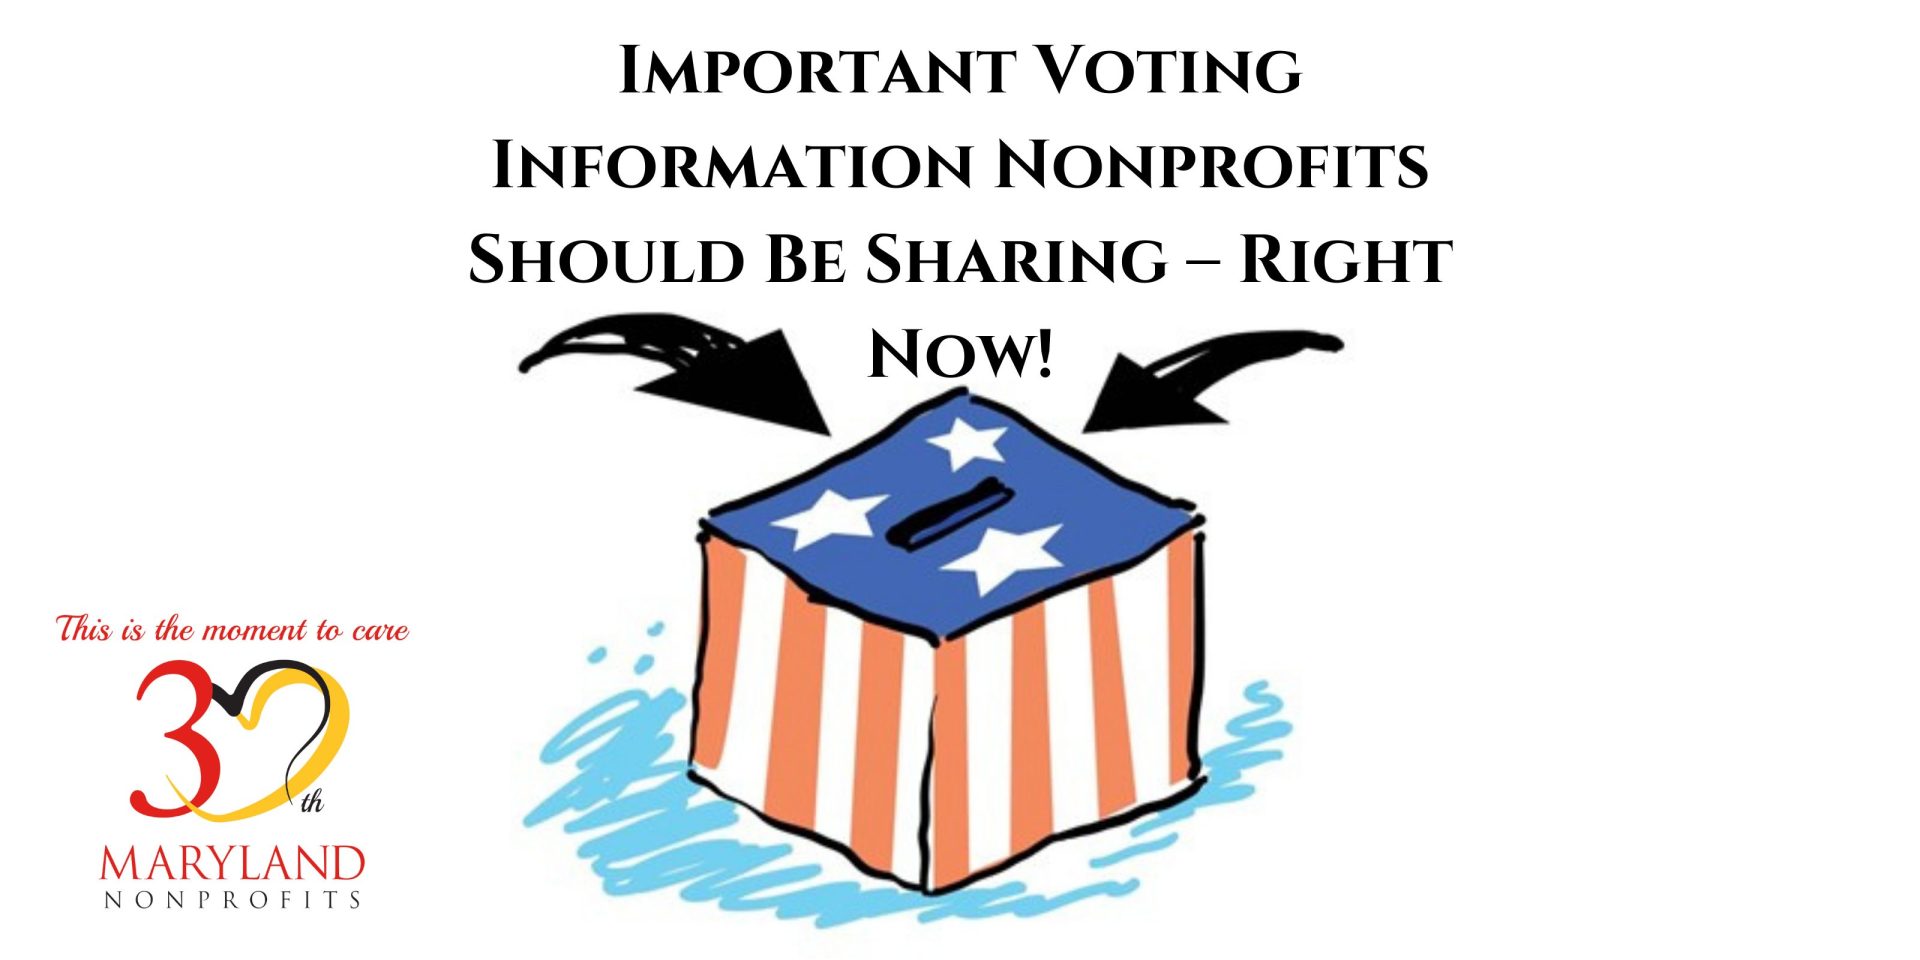 Important Voting Information Nonprofits Should Be Sharing – Right Now!